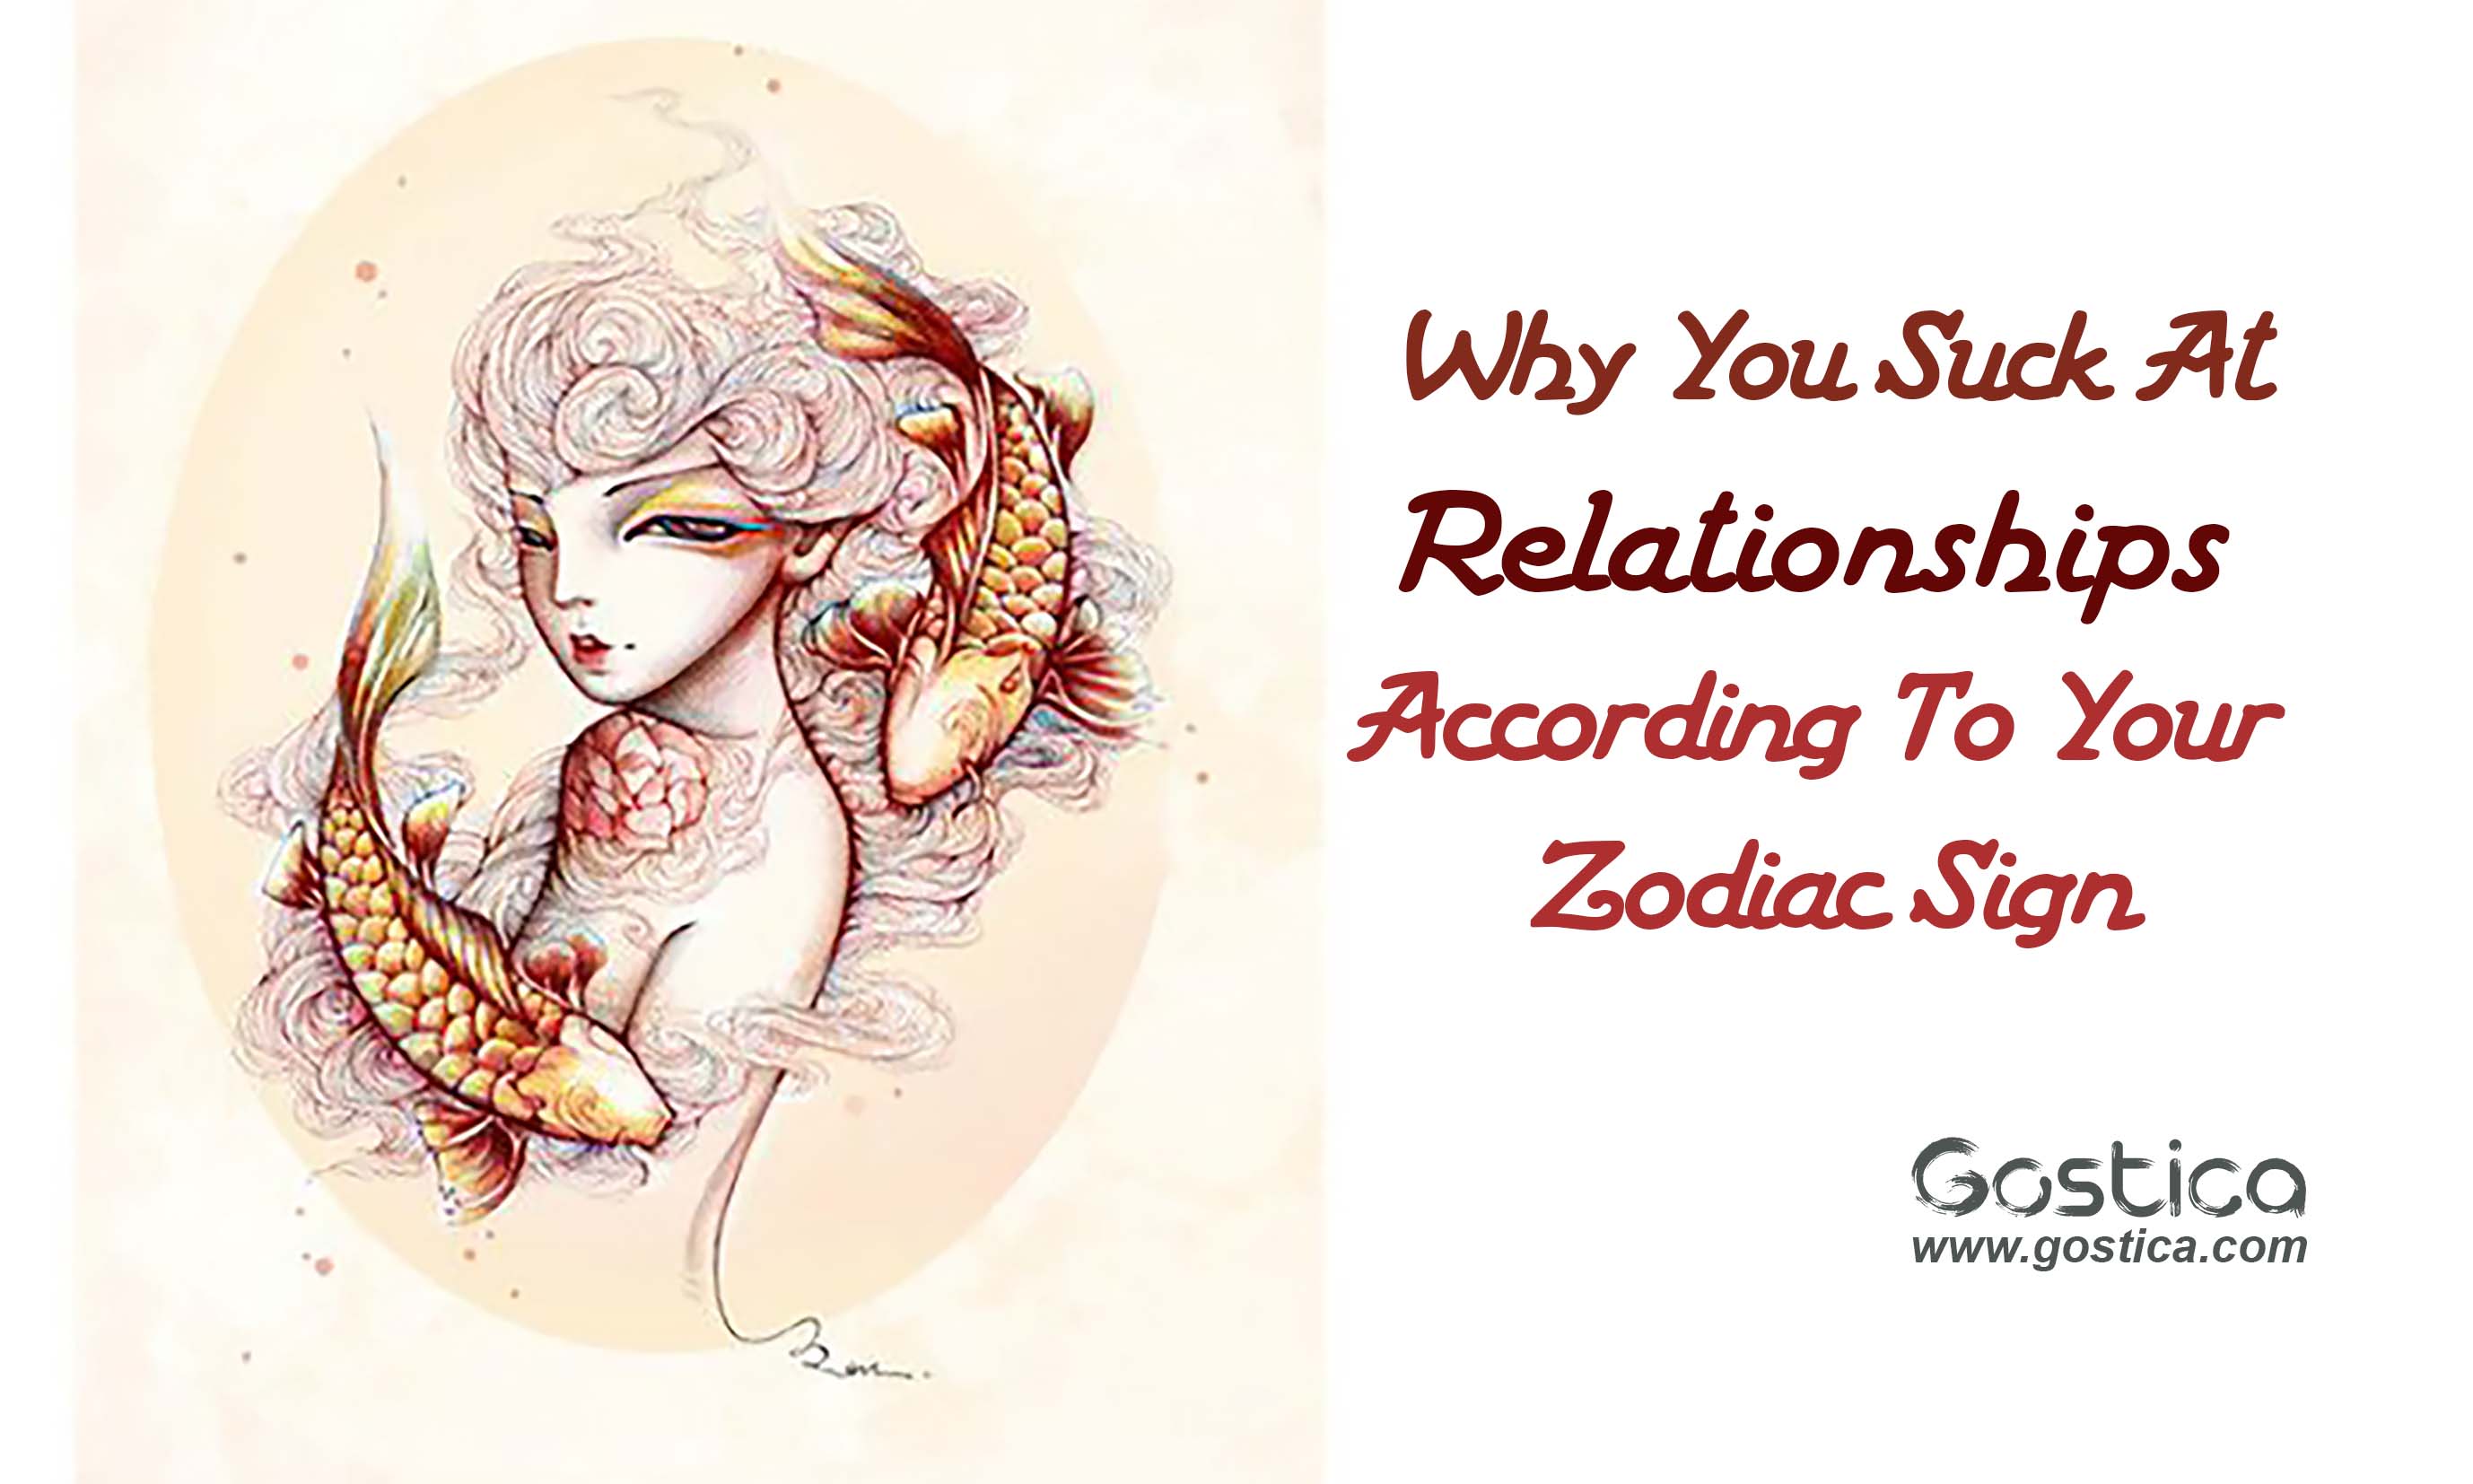 Why-You-Suck-At-Relationships-–-According-To-Your-Zodiac-Sign.jpg